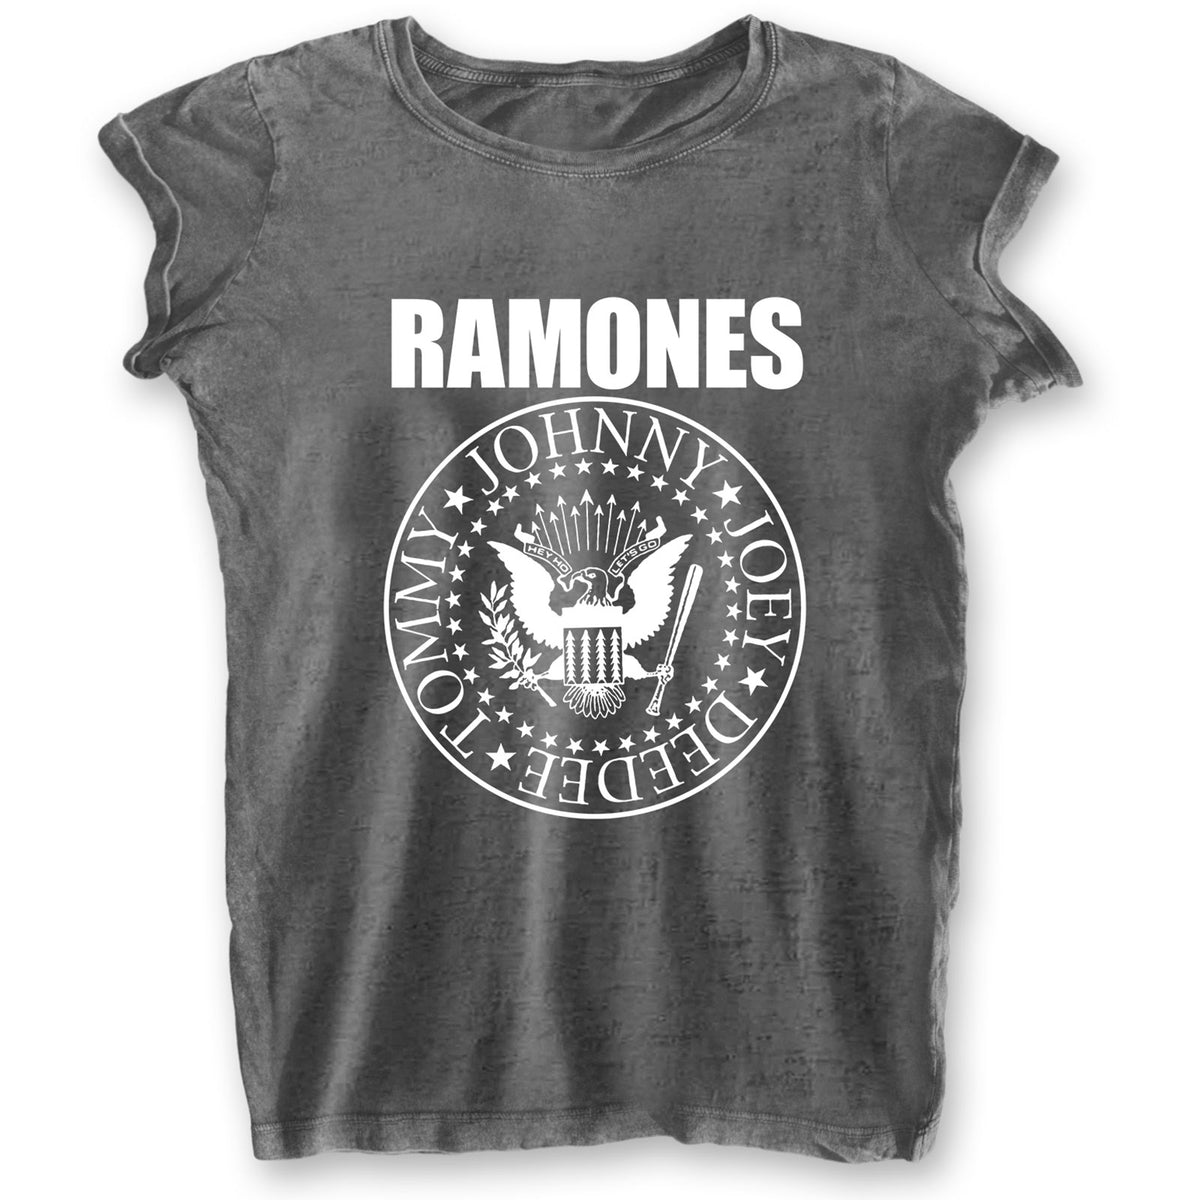 The Ramones Ladies T-Shirt - Presidential Seal (Burnout) Official Licensed Design